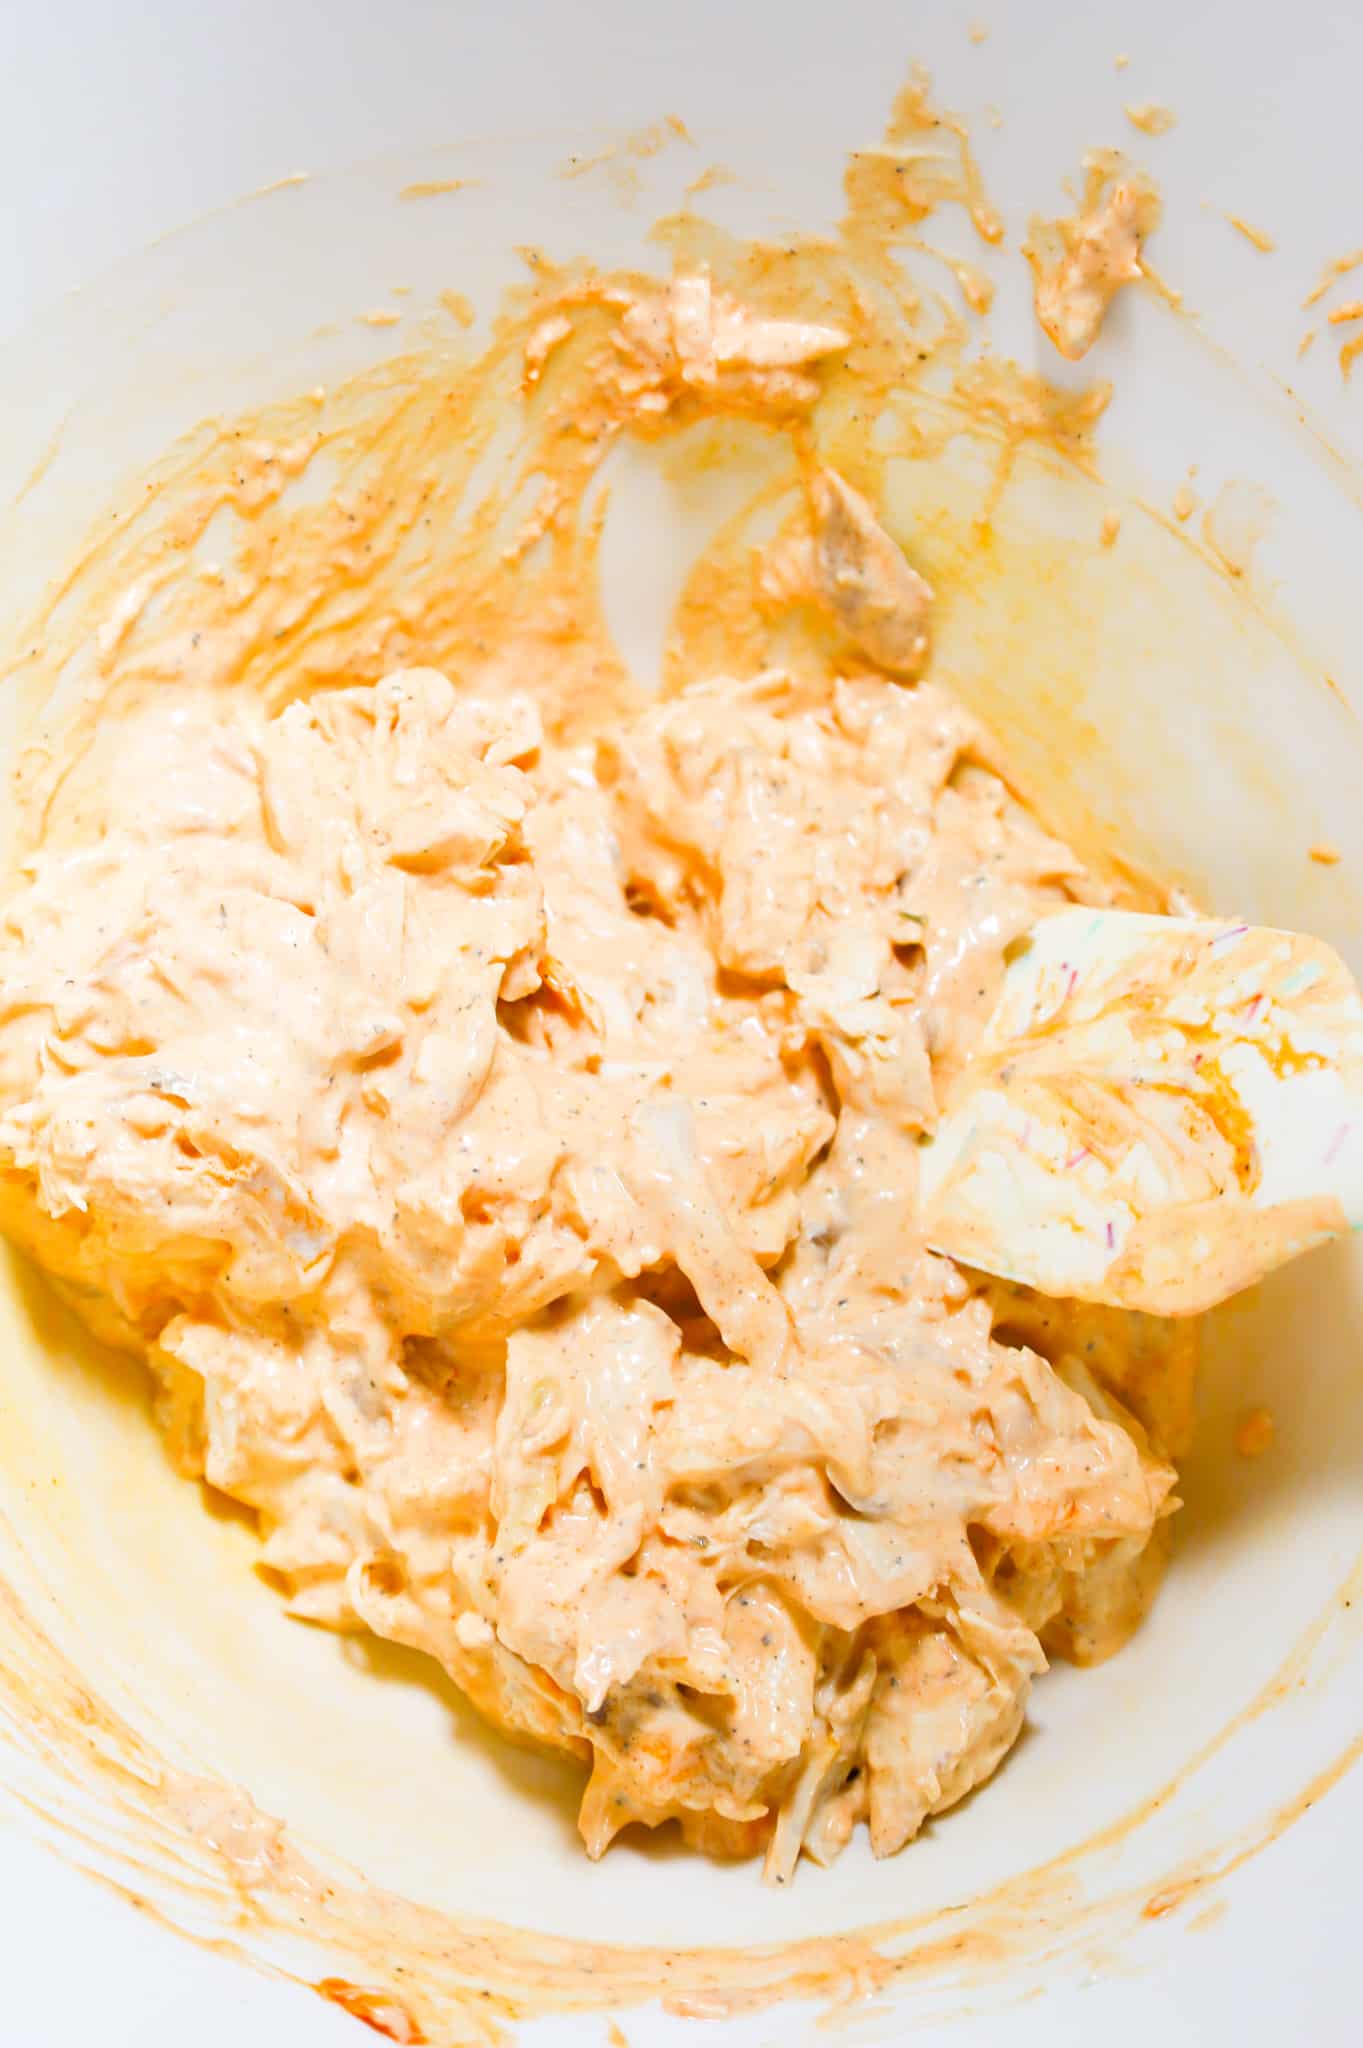 shredded chicken, mayo, ranch dressing and Buffalo sauce all stirred together in a mixing bowl